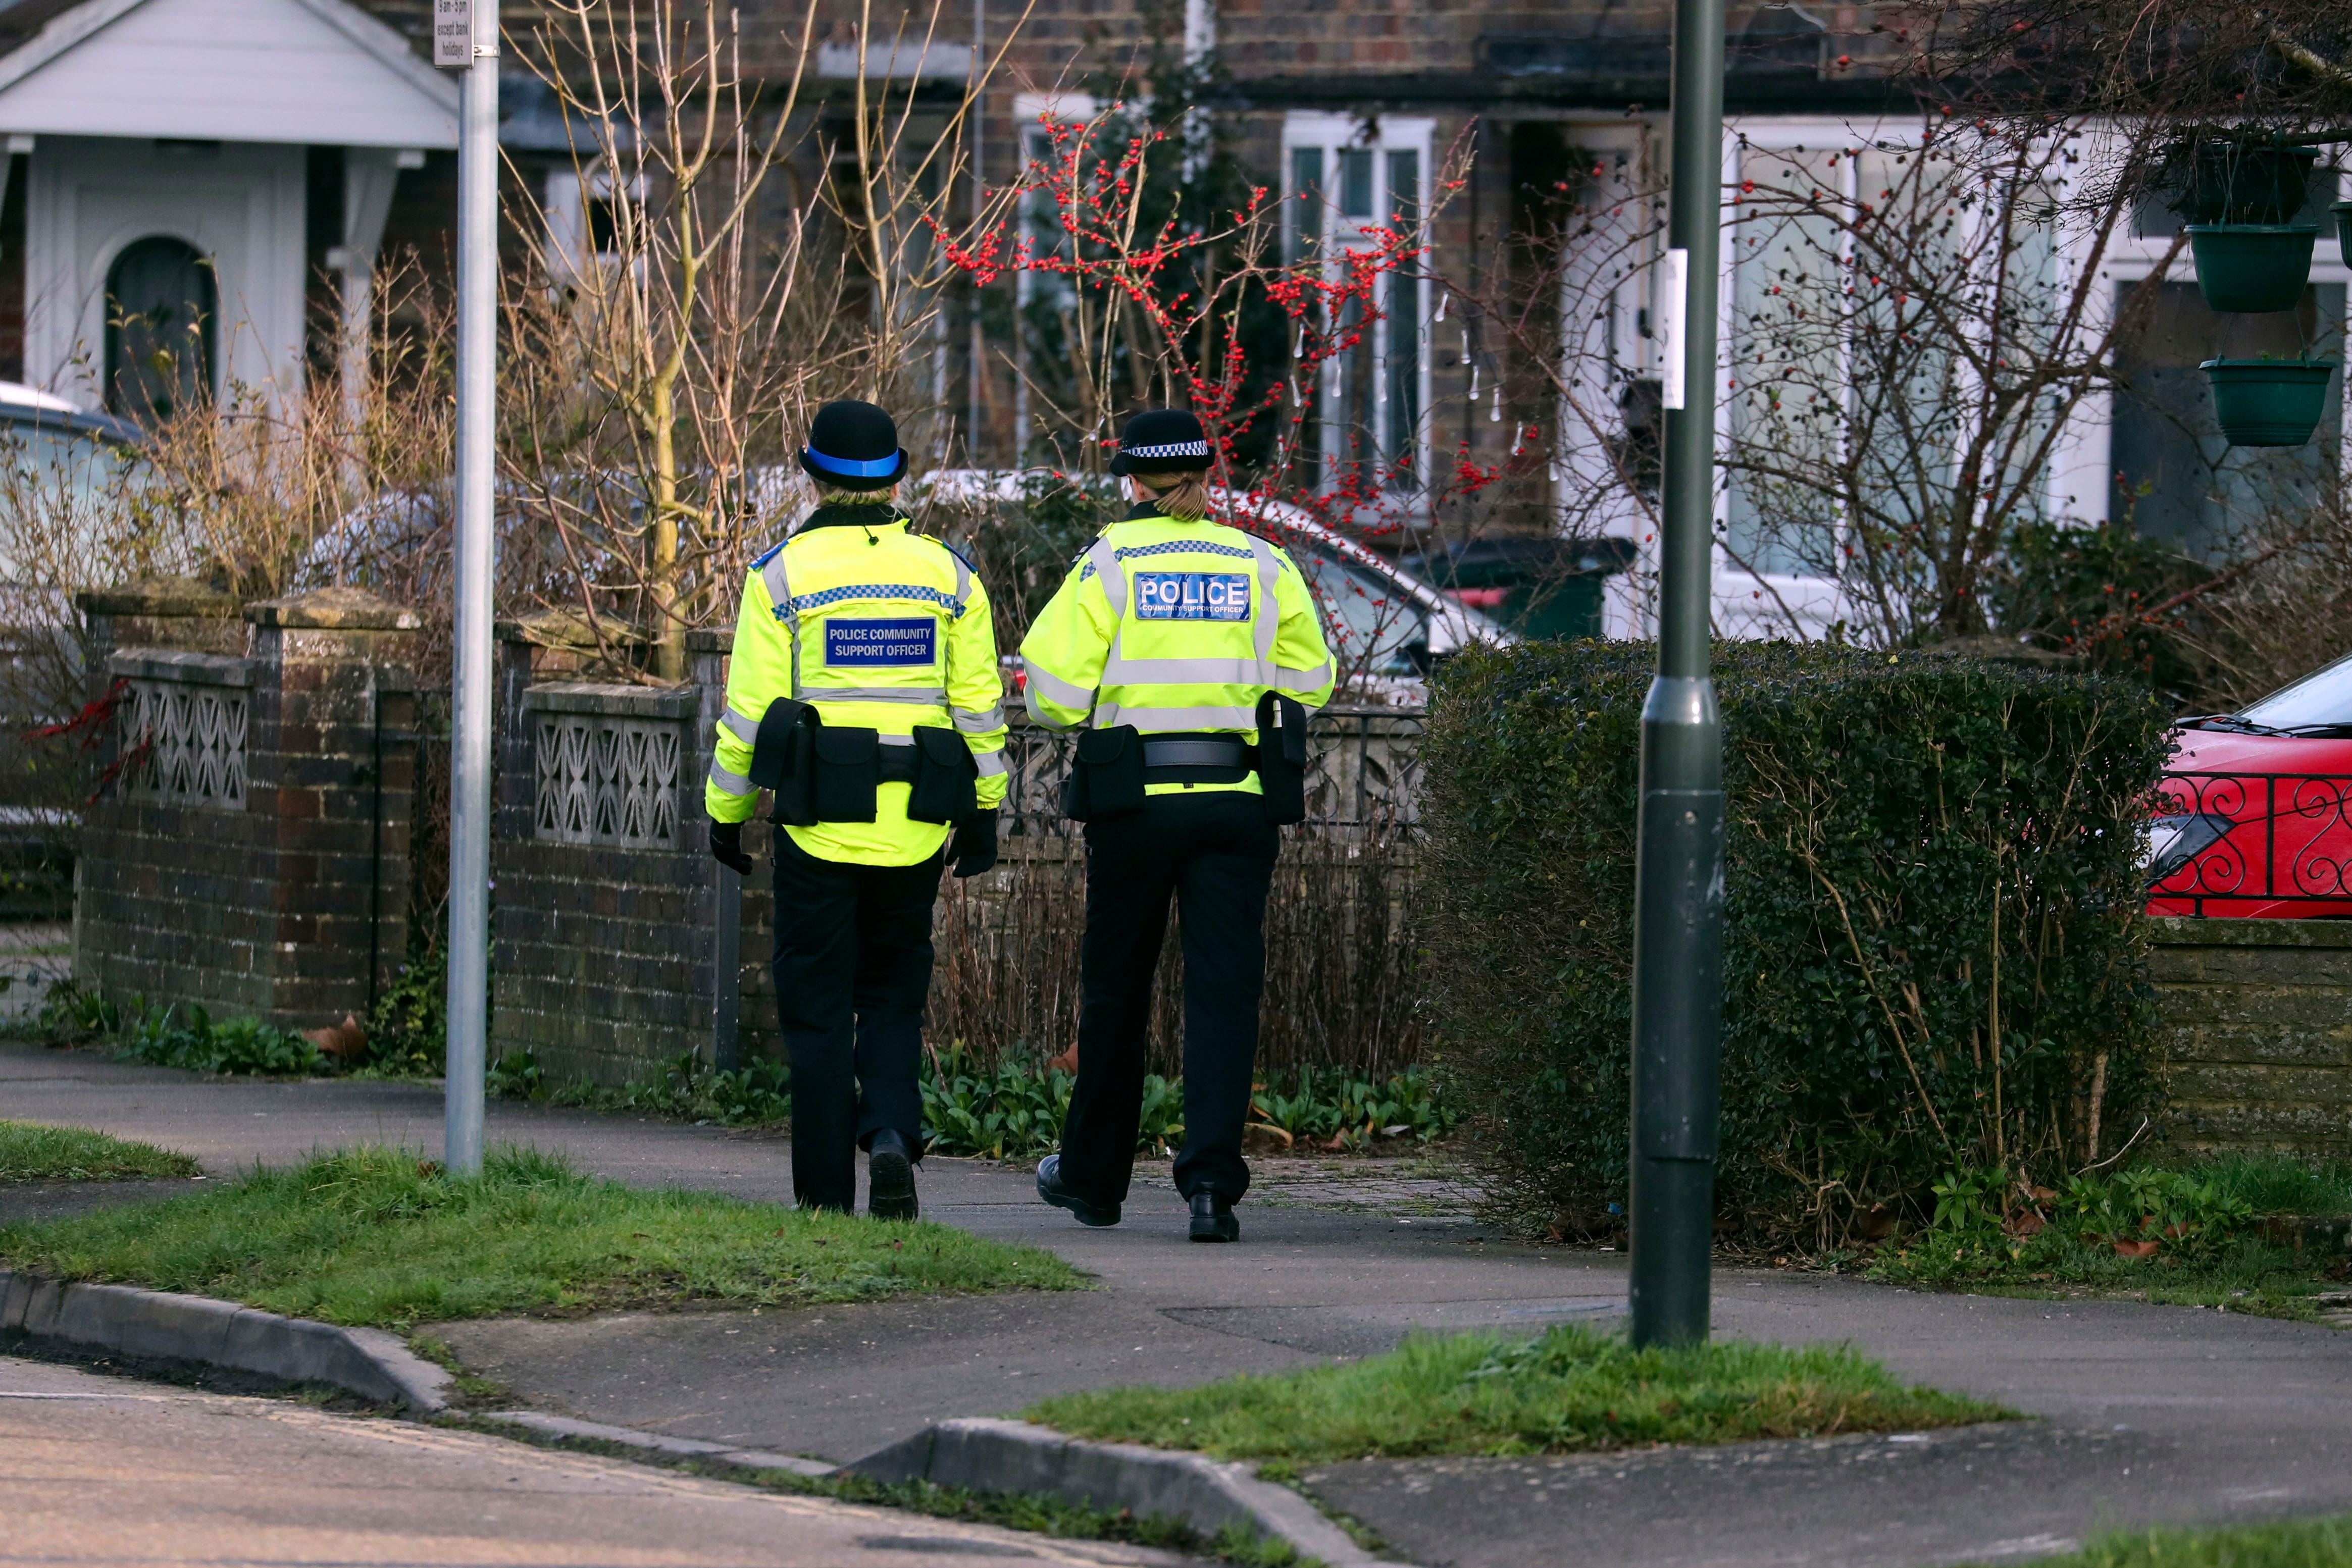 Police numbers have increased but a government programme flooded forces with inexperienced officers